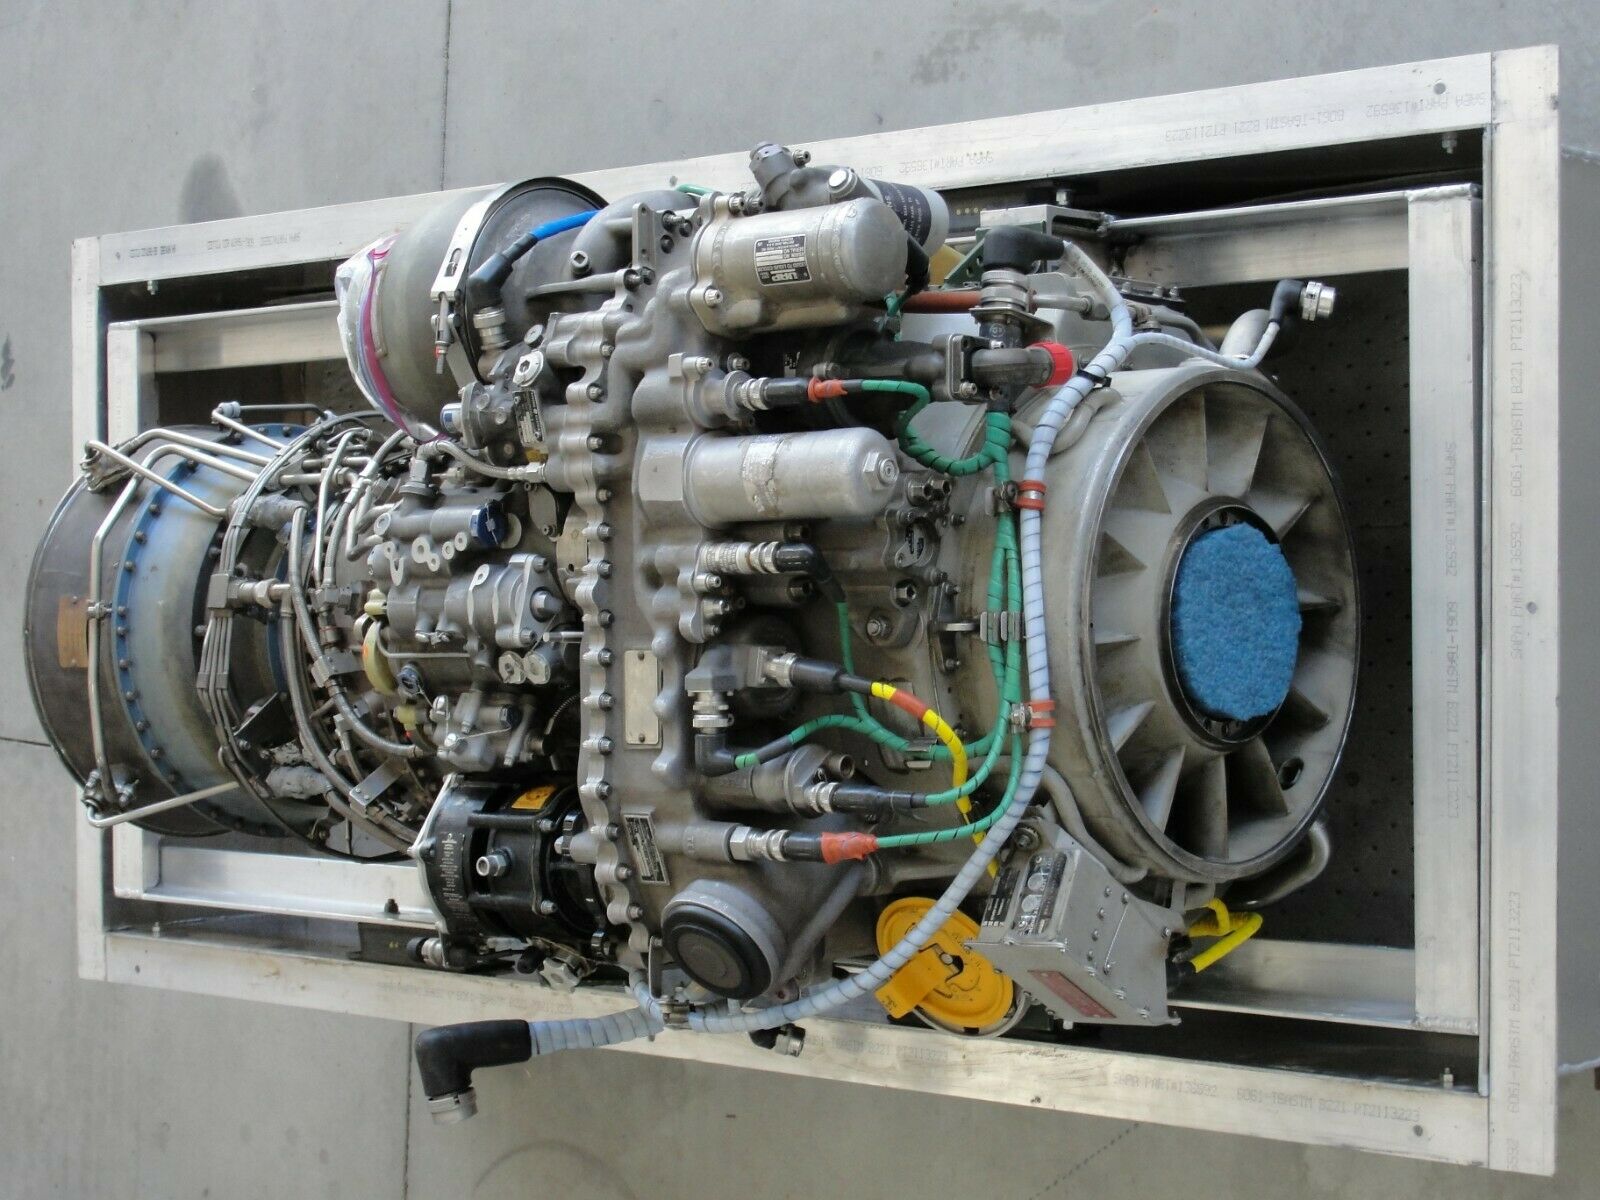 There S A 1 622 Shp Black Hawk Helicopter Turbine Engine For Sale On Ebay